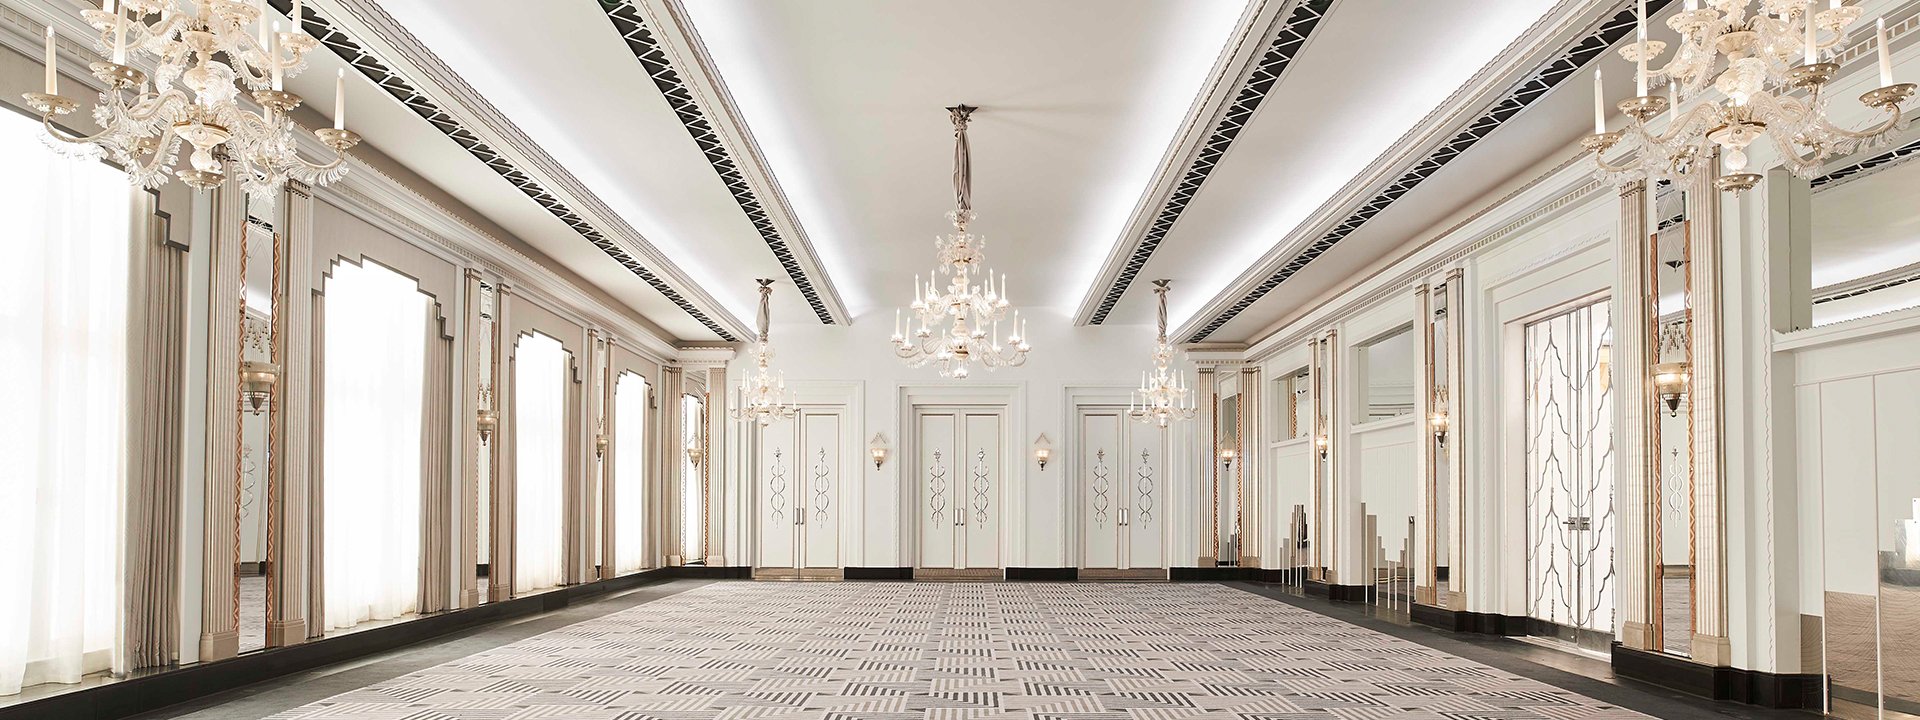 Ballroom with chandeliers, mirrors and carpet in Art Deco style, with gentle lighting that circulates through the space.